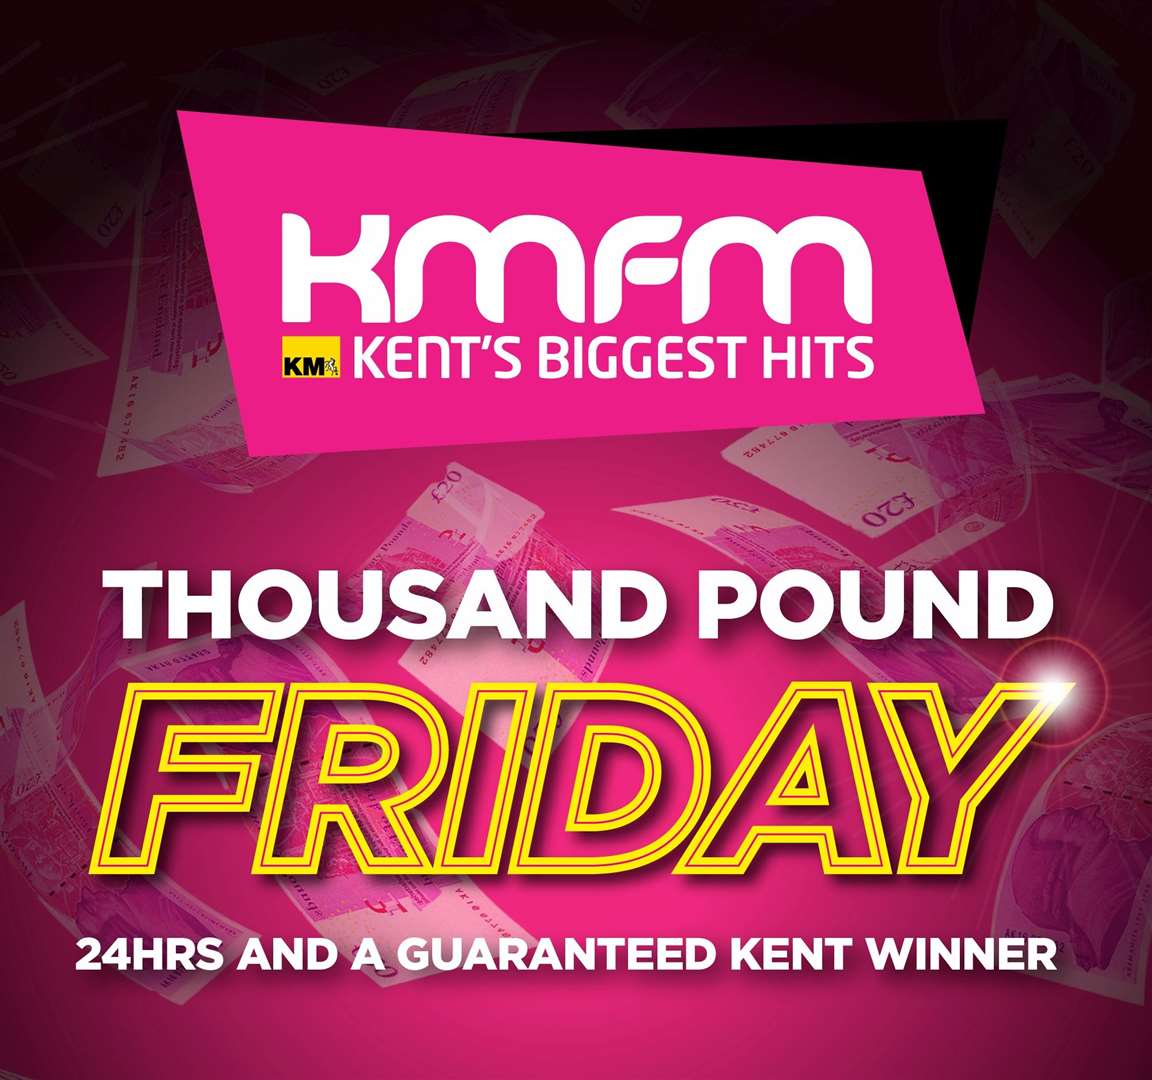 This month’s Thousand Pound Friday winner announced